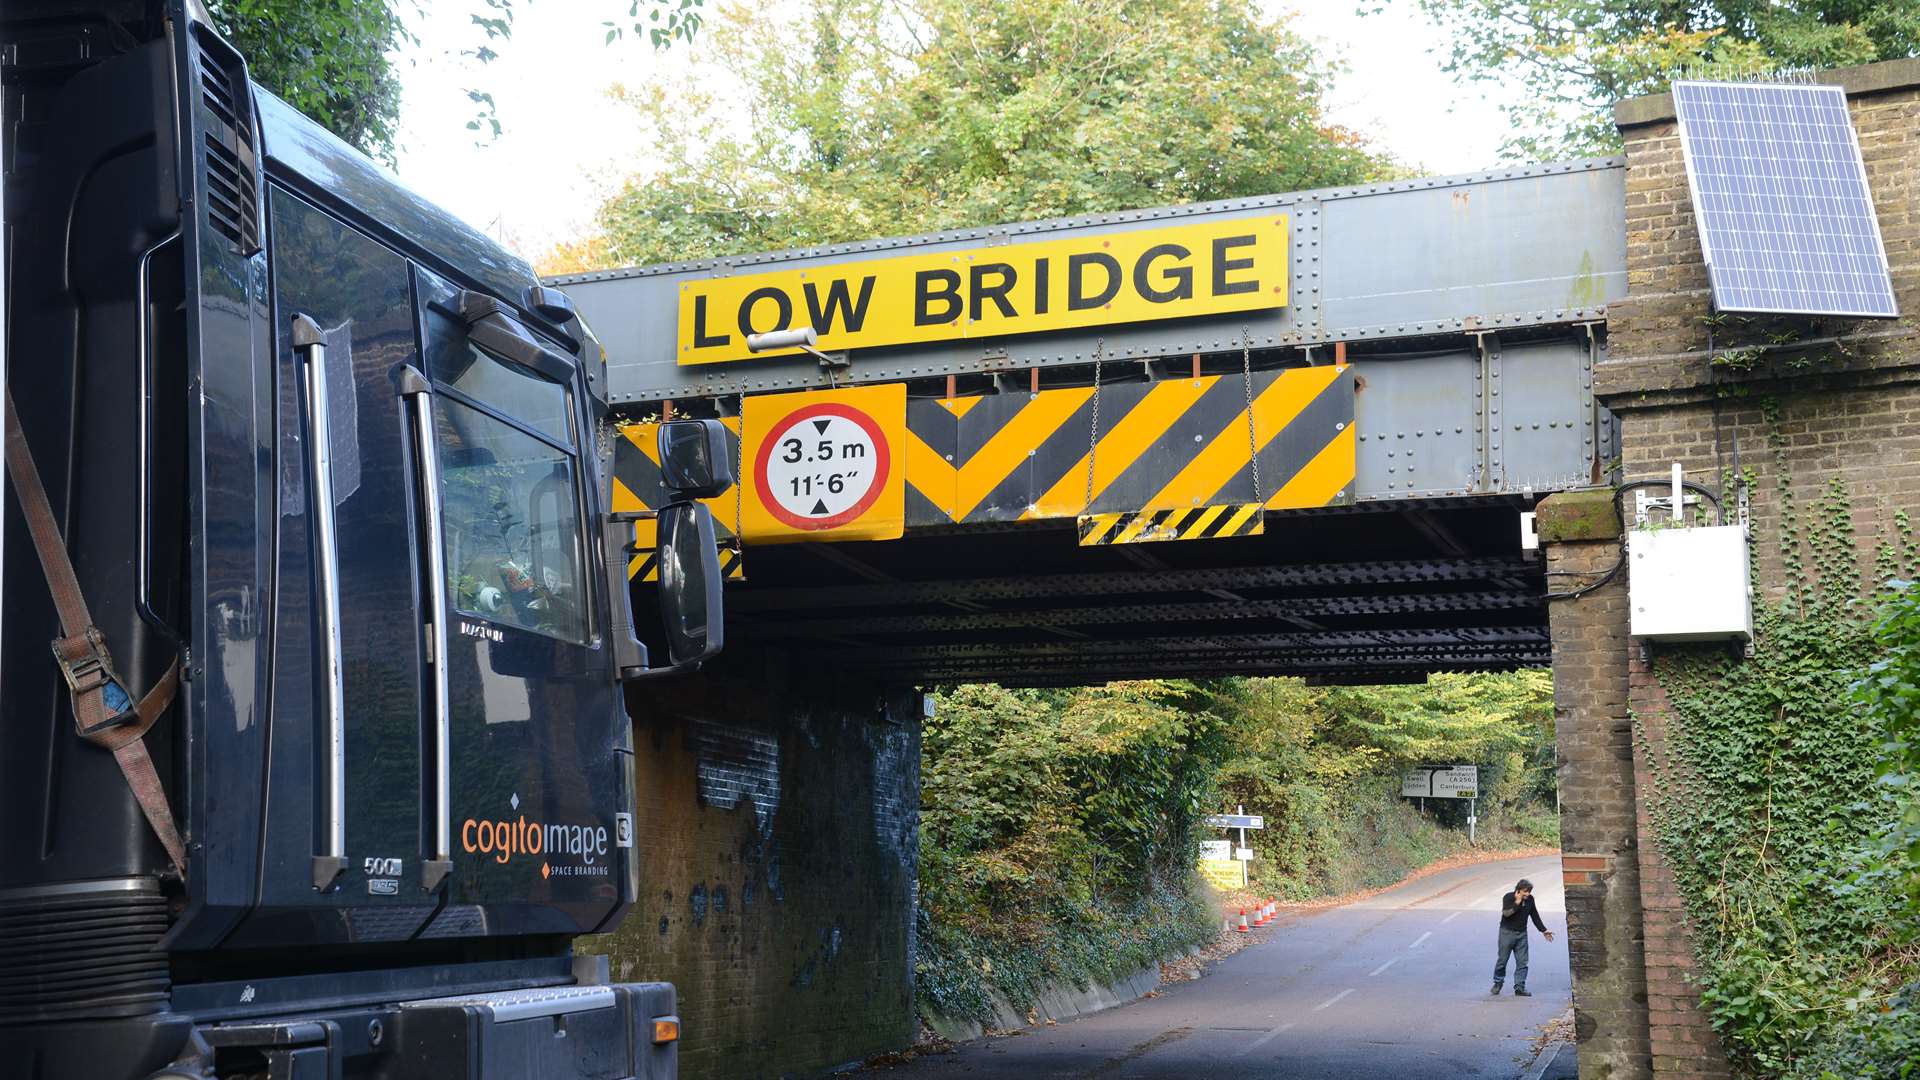 The lorry now freed from the bridge.The driver is pictured nearby.